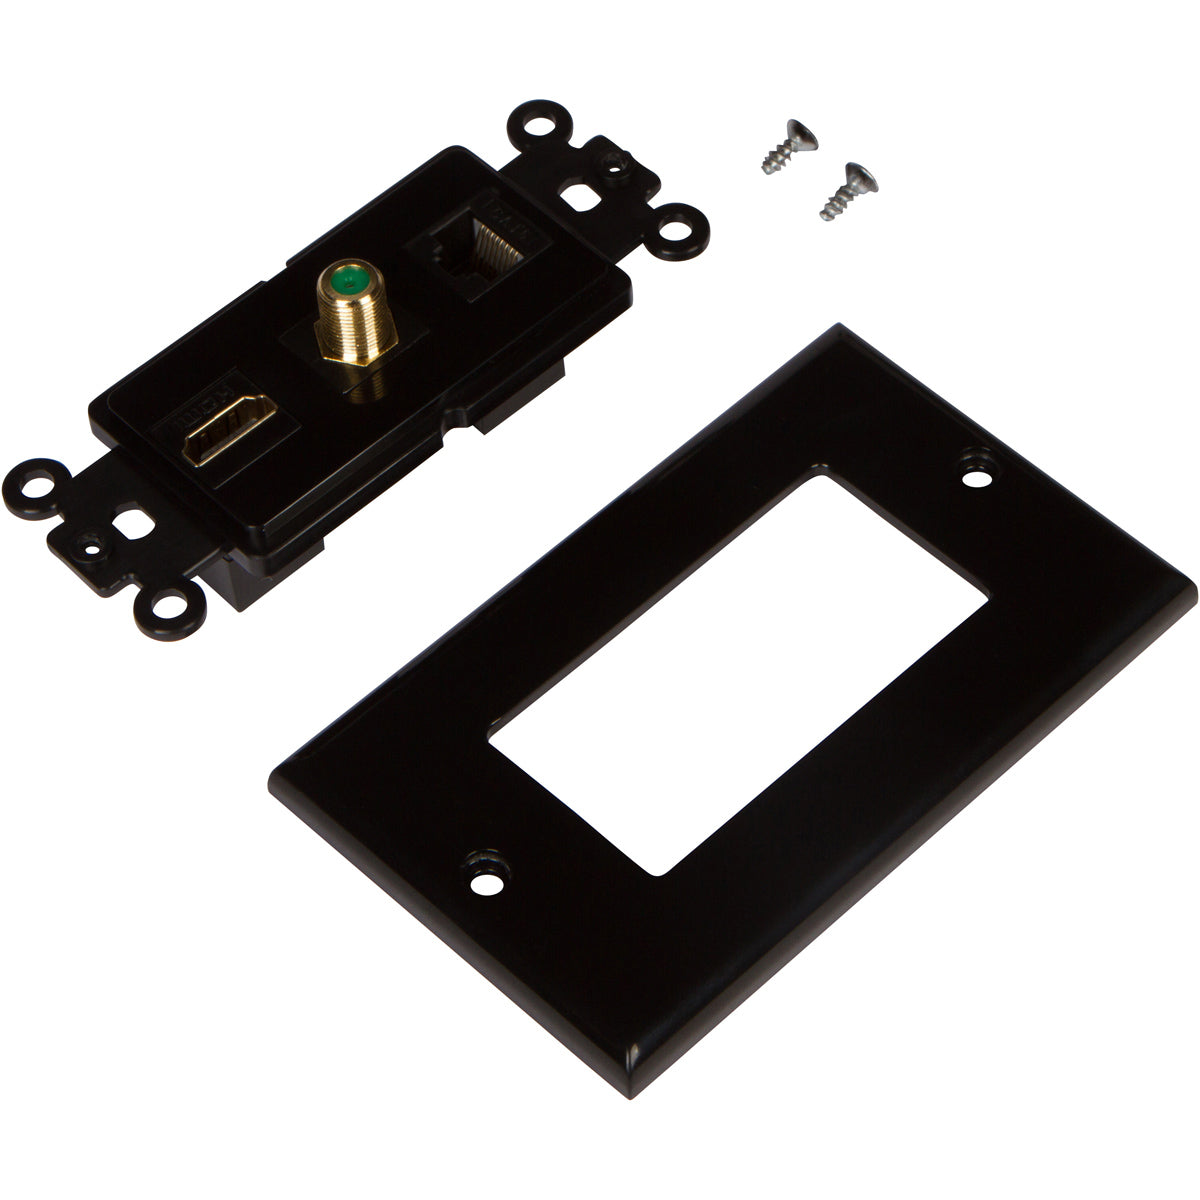 HDMI Coax Ethernet Wall Plate [UL Listed] with Single Gang Low Voltage Mounting Bracket Device (Black Kit) - Milena International Inc